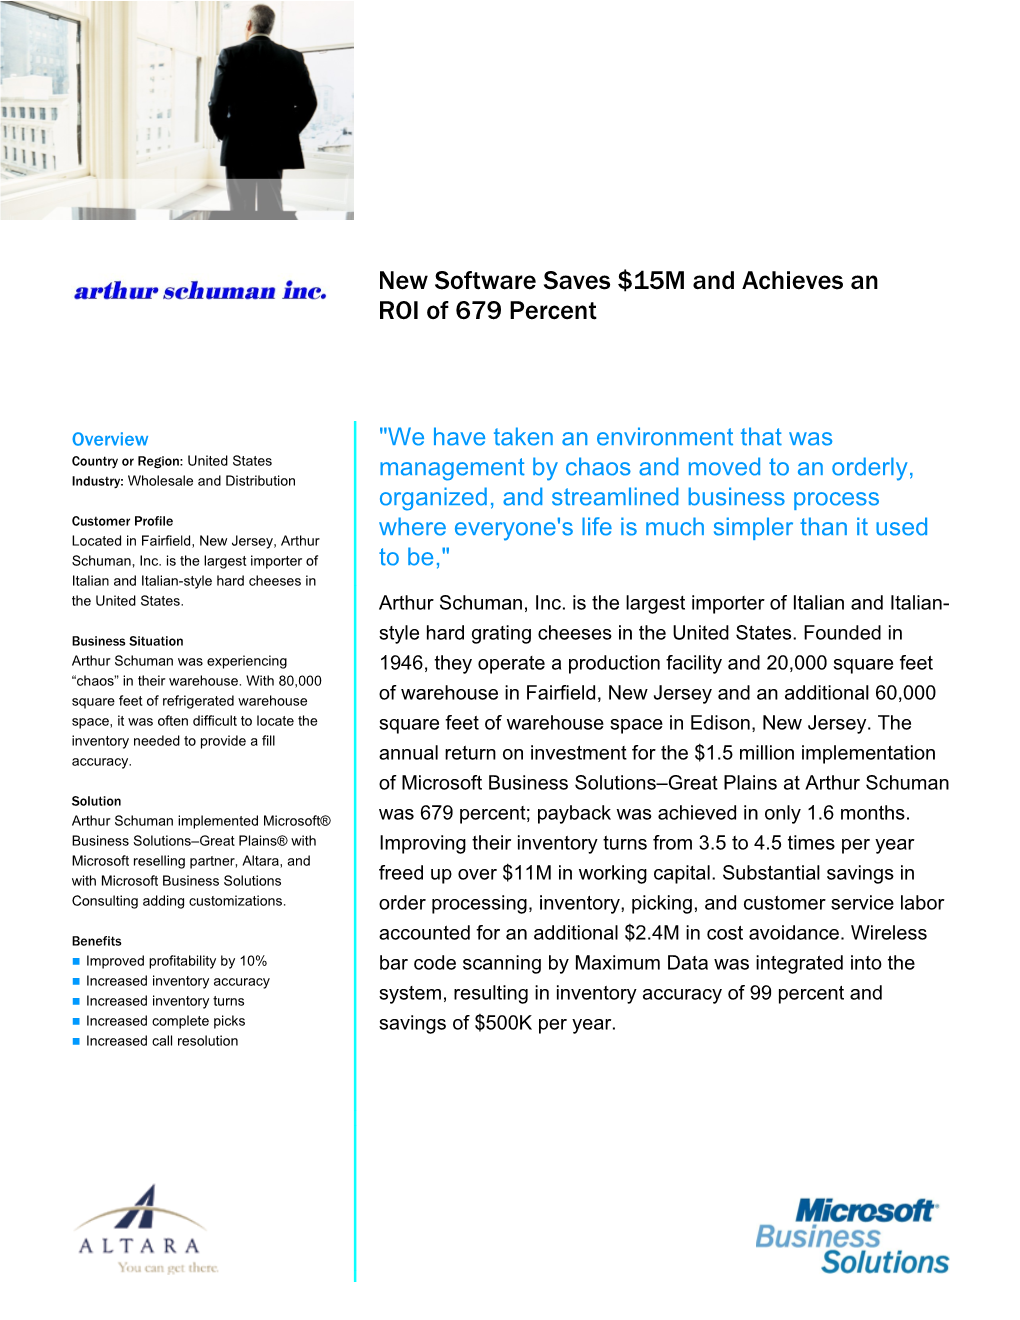 New Software Saves $15M and Achieves an ROI of 679 Percent